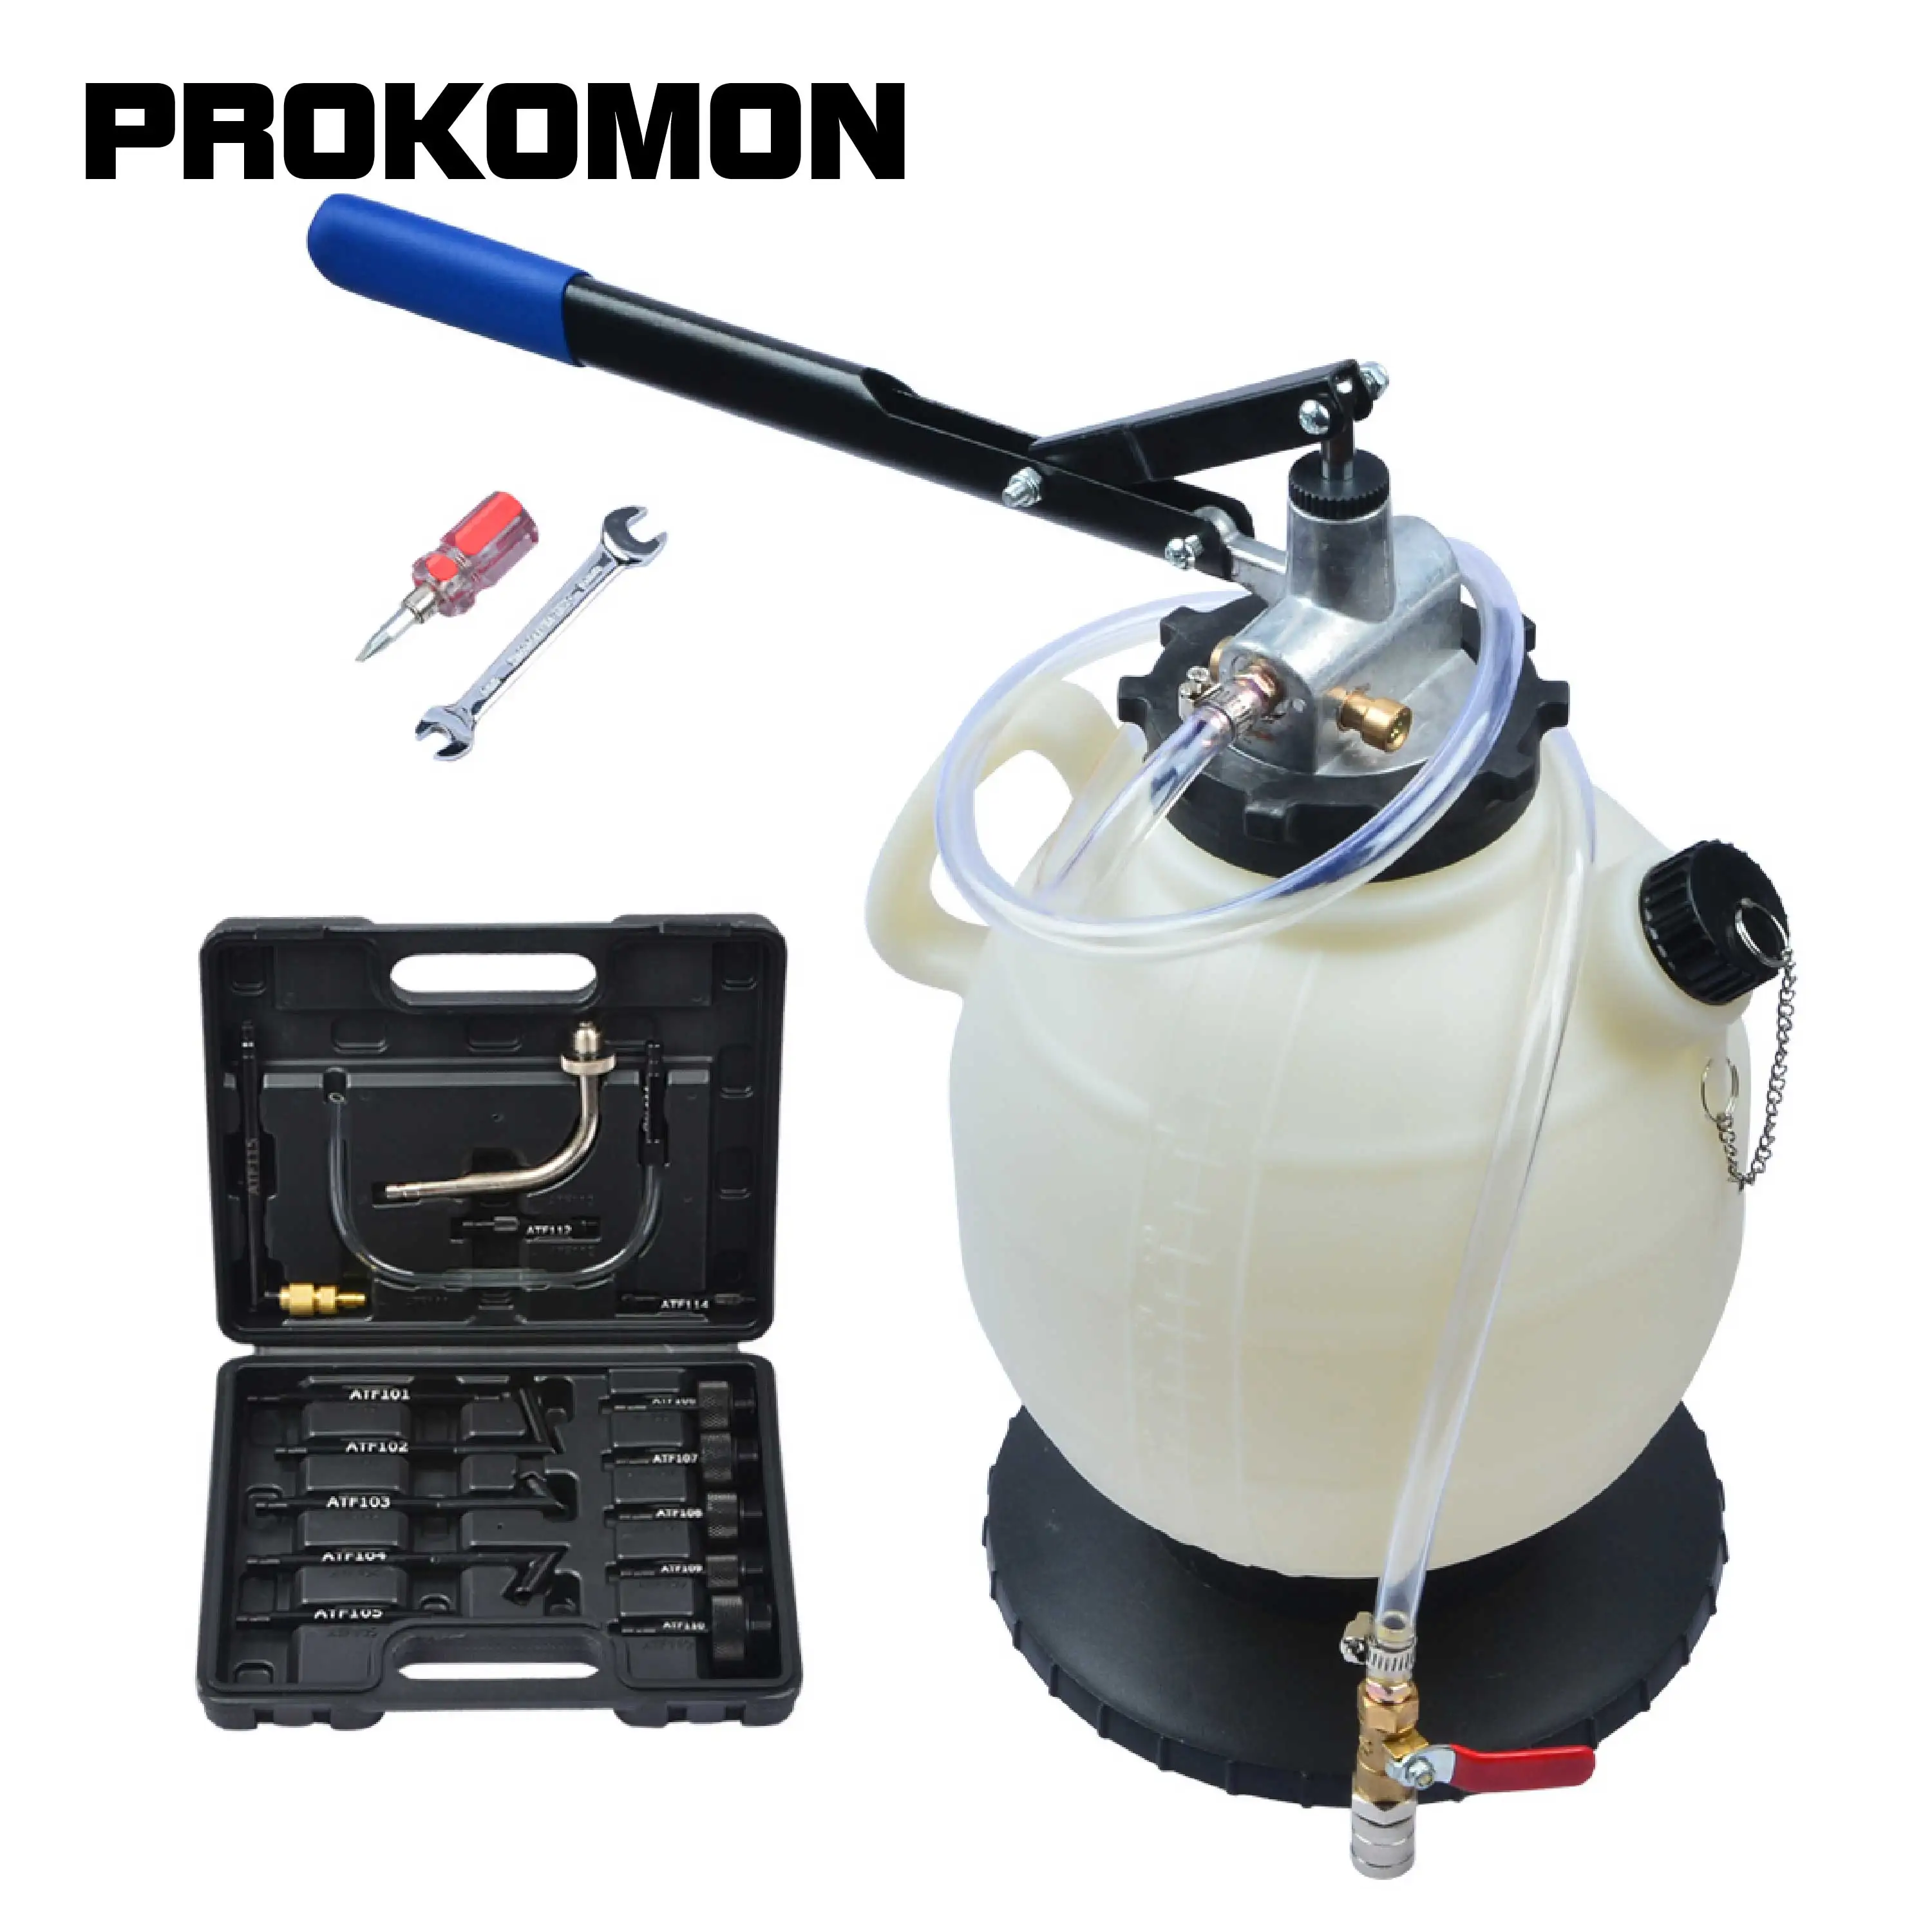 

Prokomon 7.5L Hand Transmission Oil Filling Device Machine Gearbox Oil Filler Change Tool Toolkit